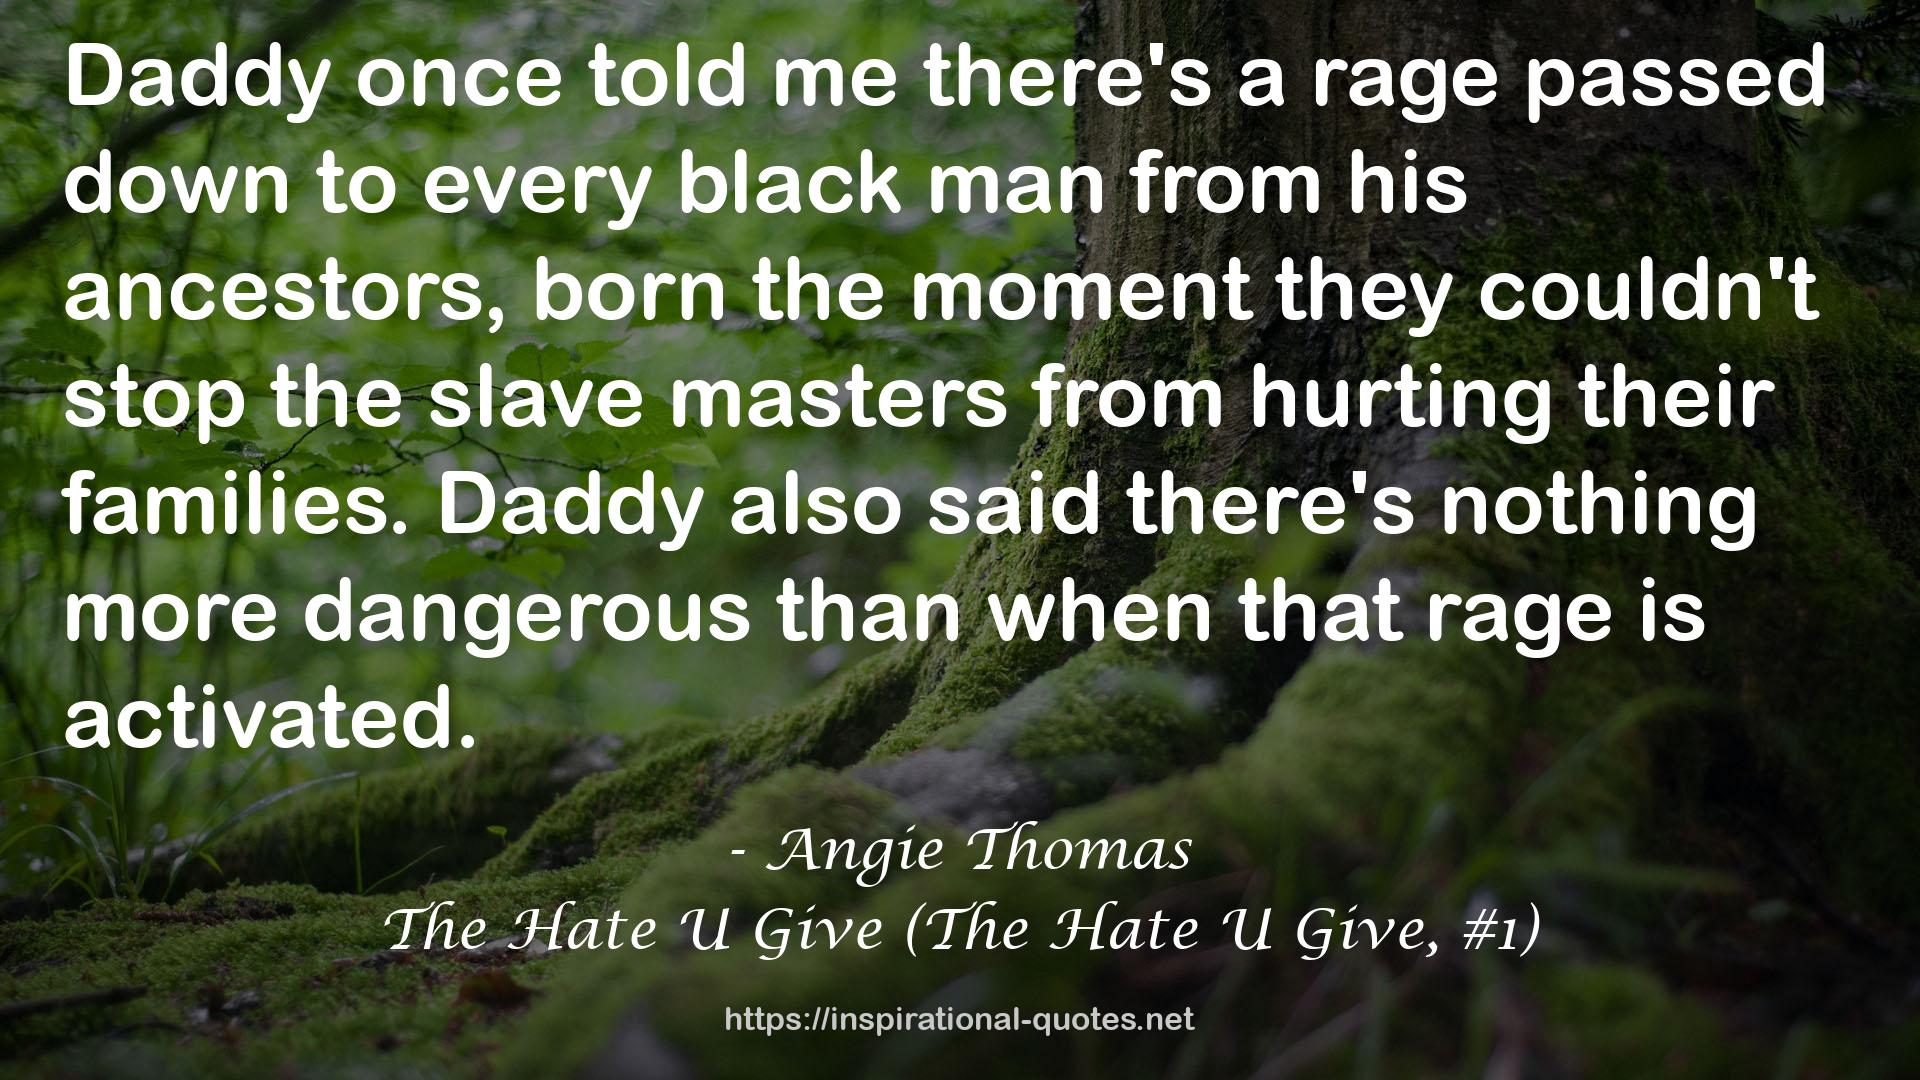 The Hate U Give (The Hate U Give, #1) QUOTES